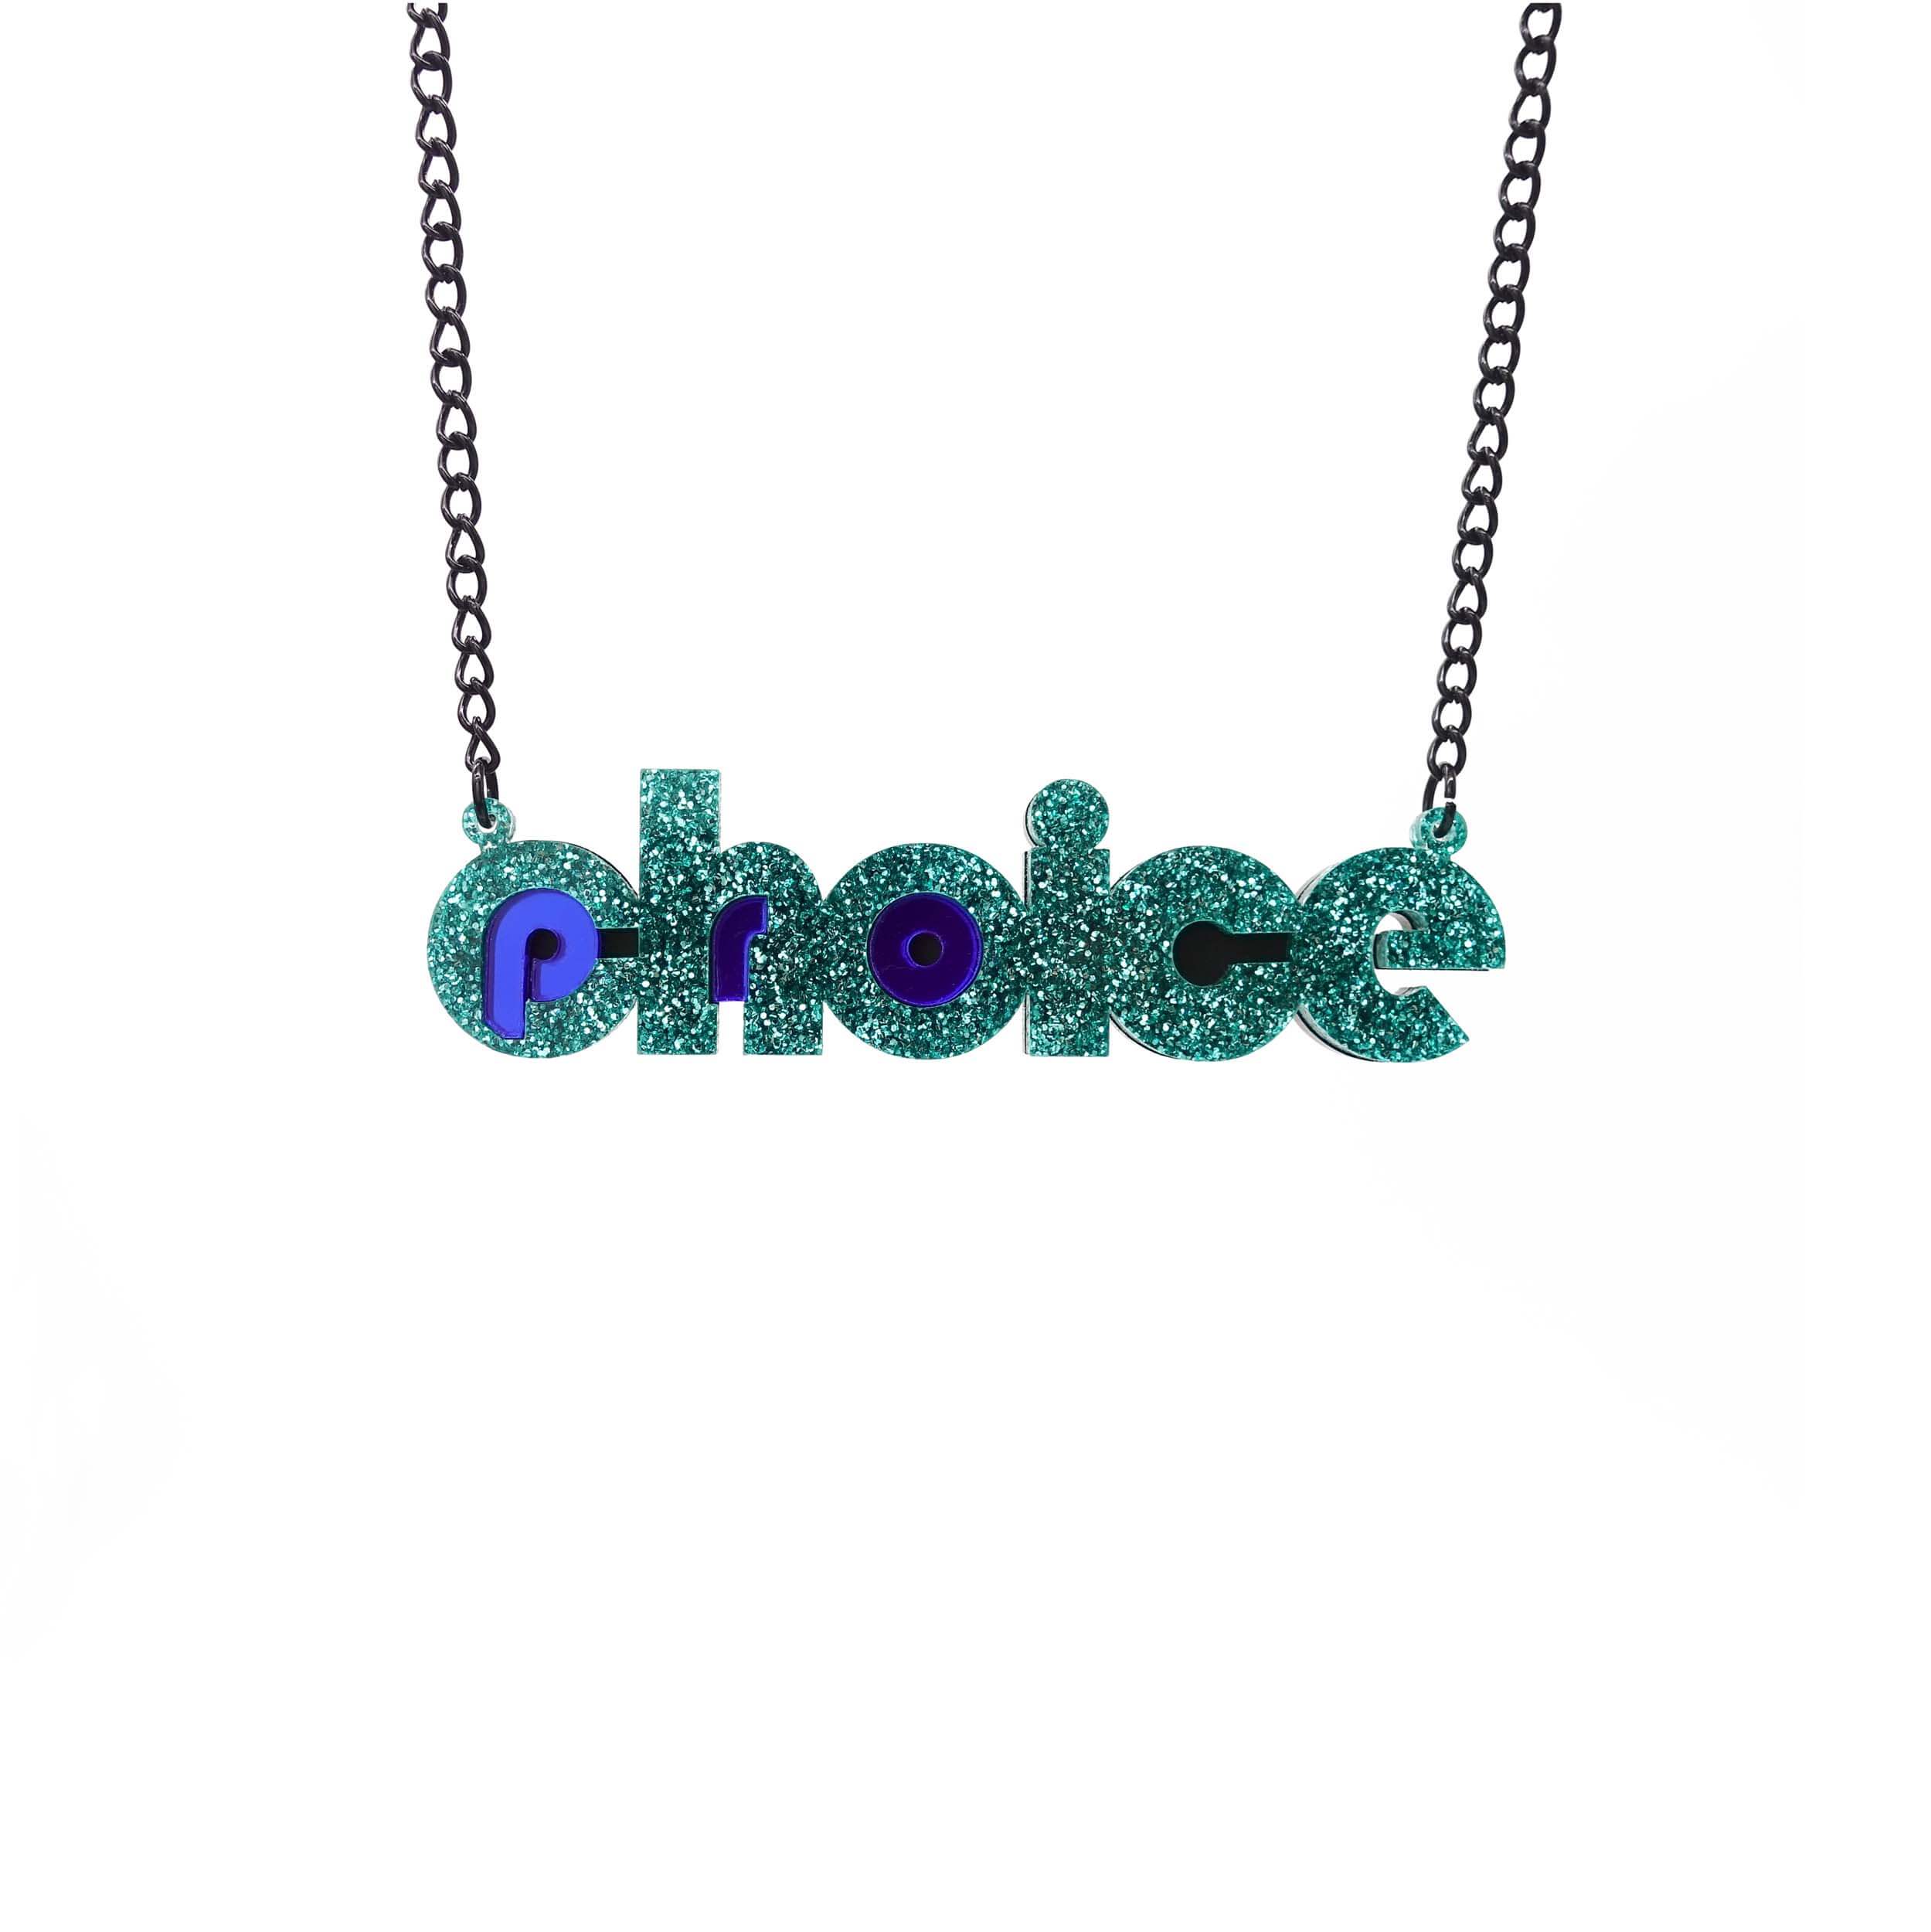 Teal glitter and indigo mirror Pro-choice necklace, shown hanging on black chain, designed by Sarah Day for Wear and Resist. £2 goes to Alliance for Choice who campaign  for Free, Safe and Legal abortions for anyone who needs them. 